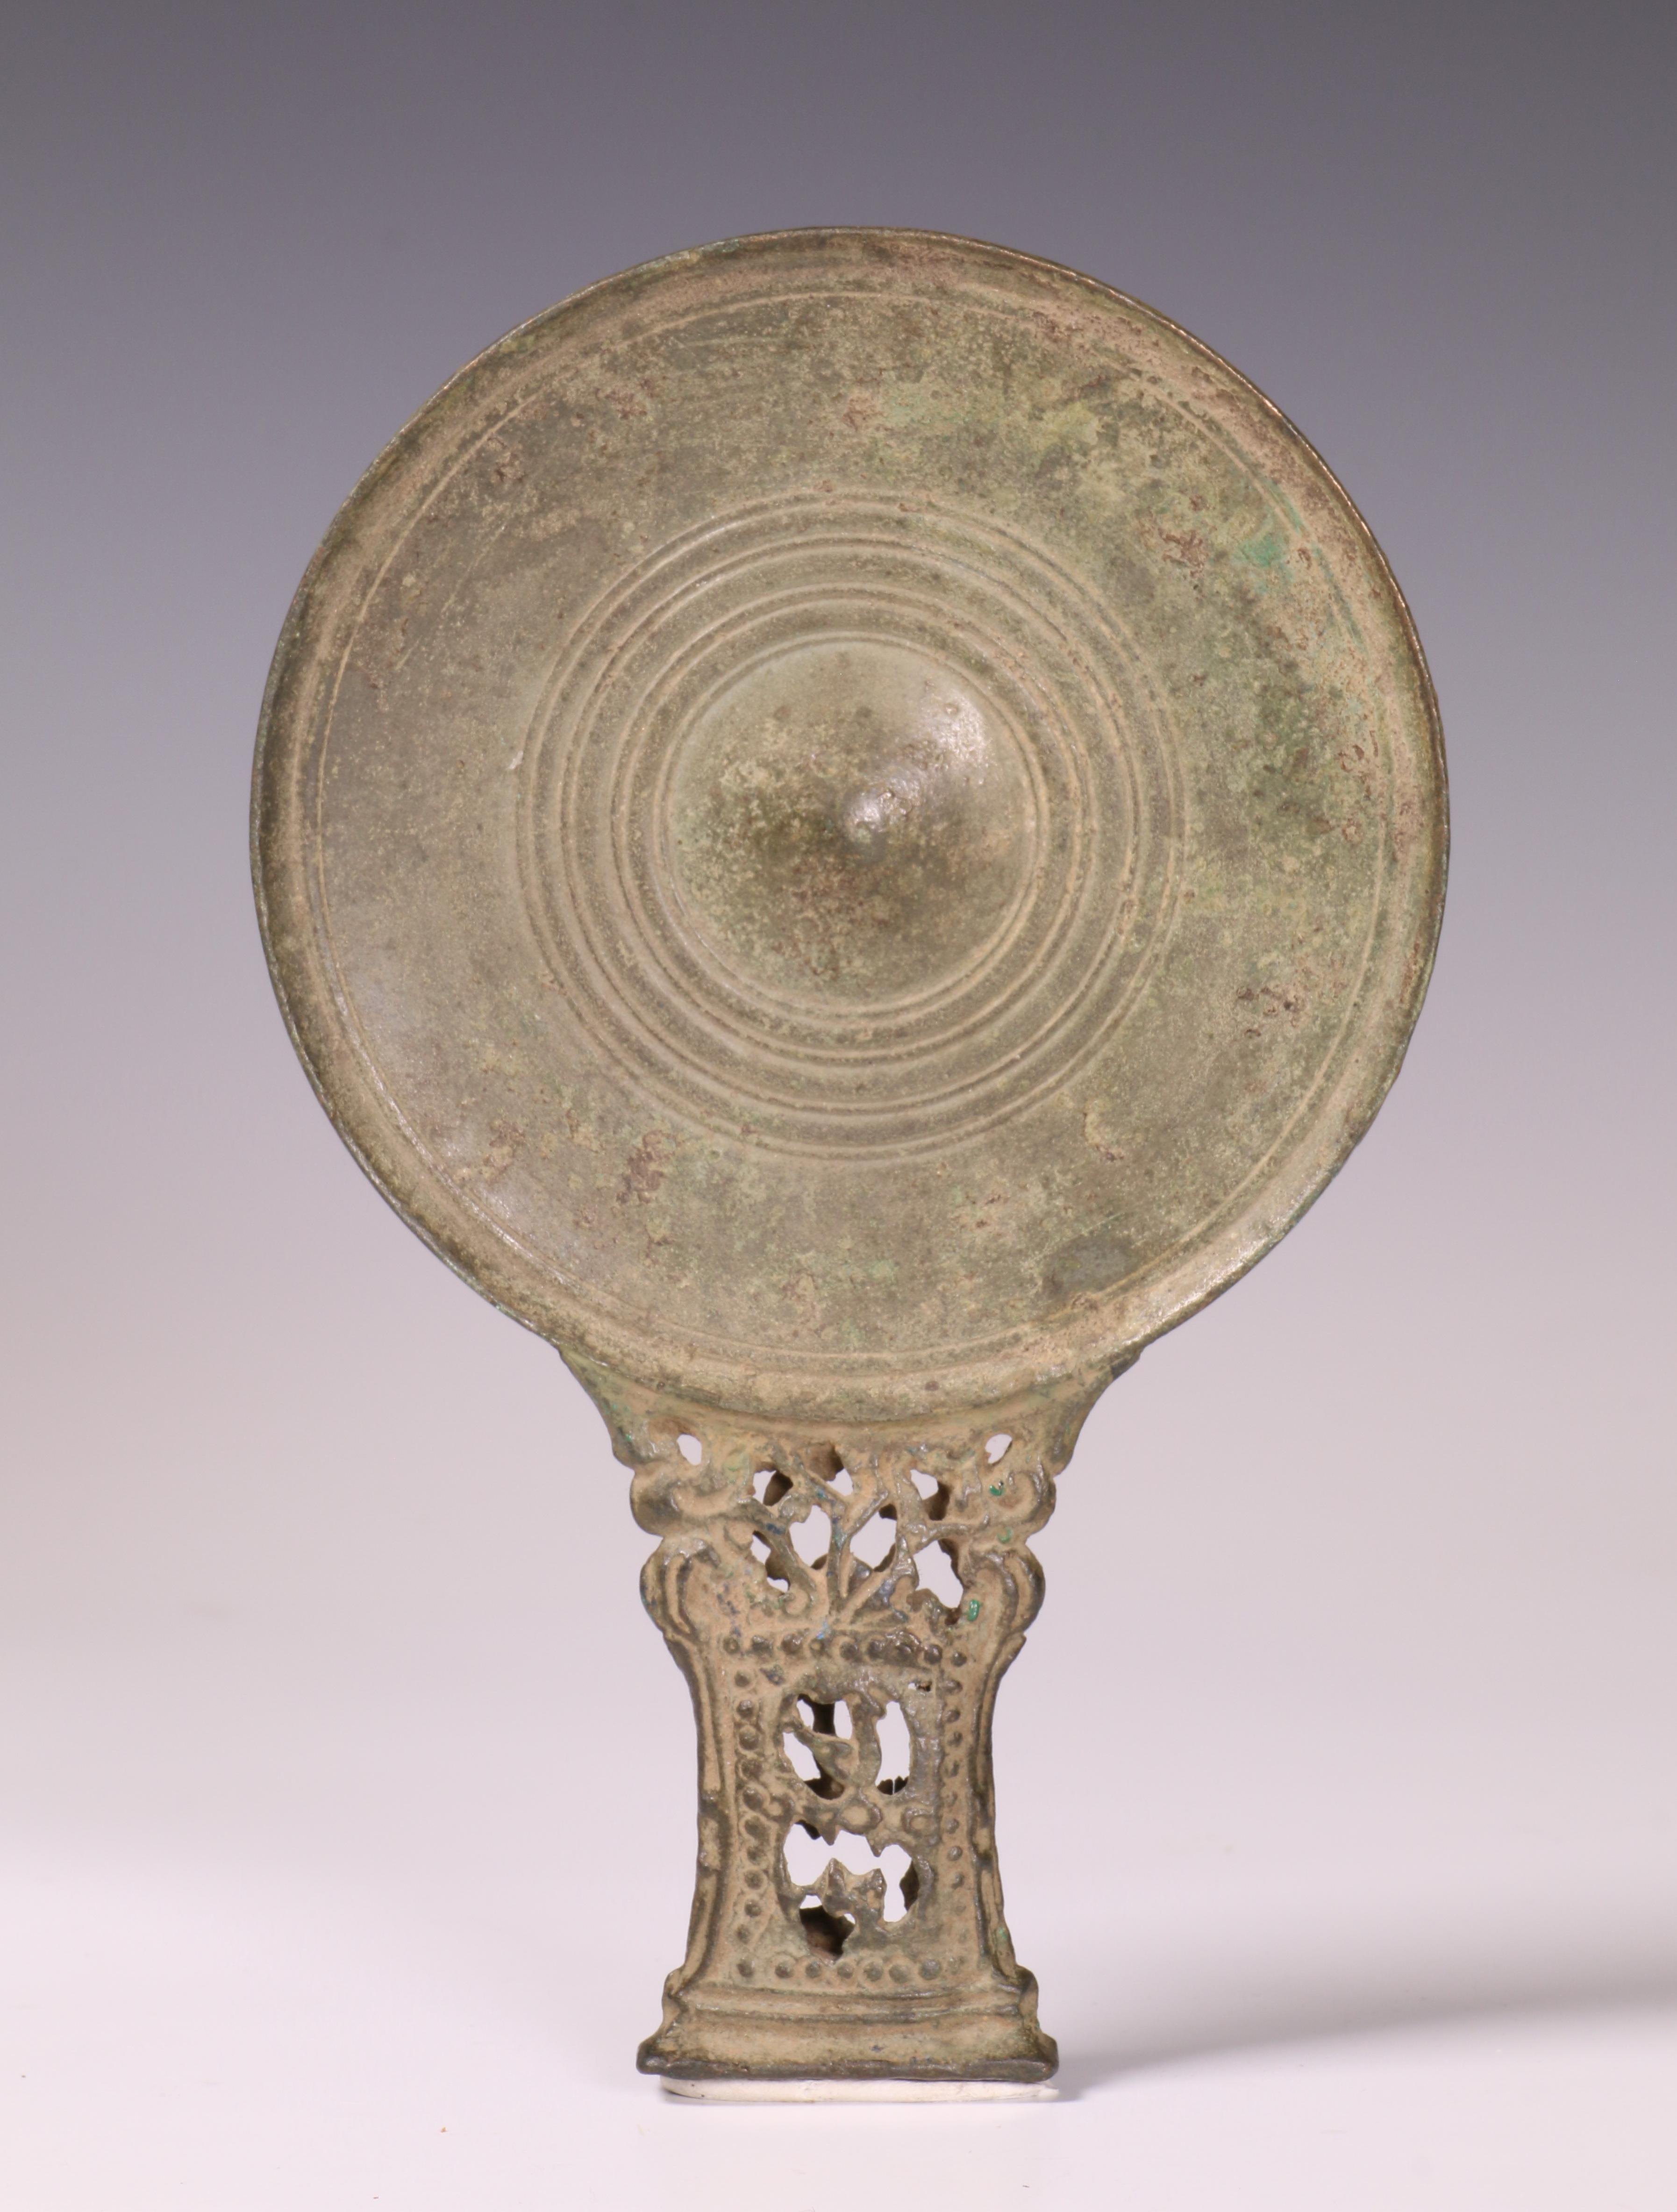 Java, East Javanese period, a bronze mirror, ca. 13th-15th century. - Image 2 of 5